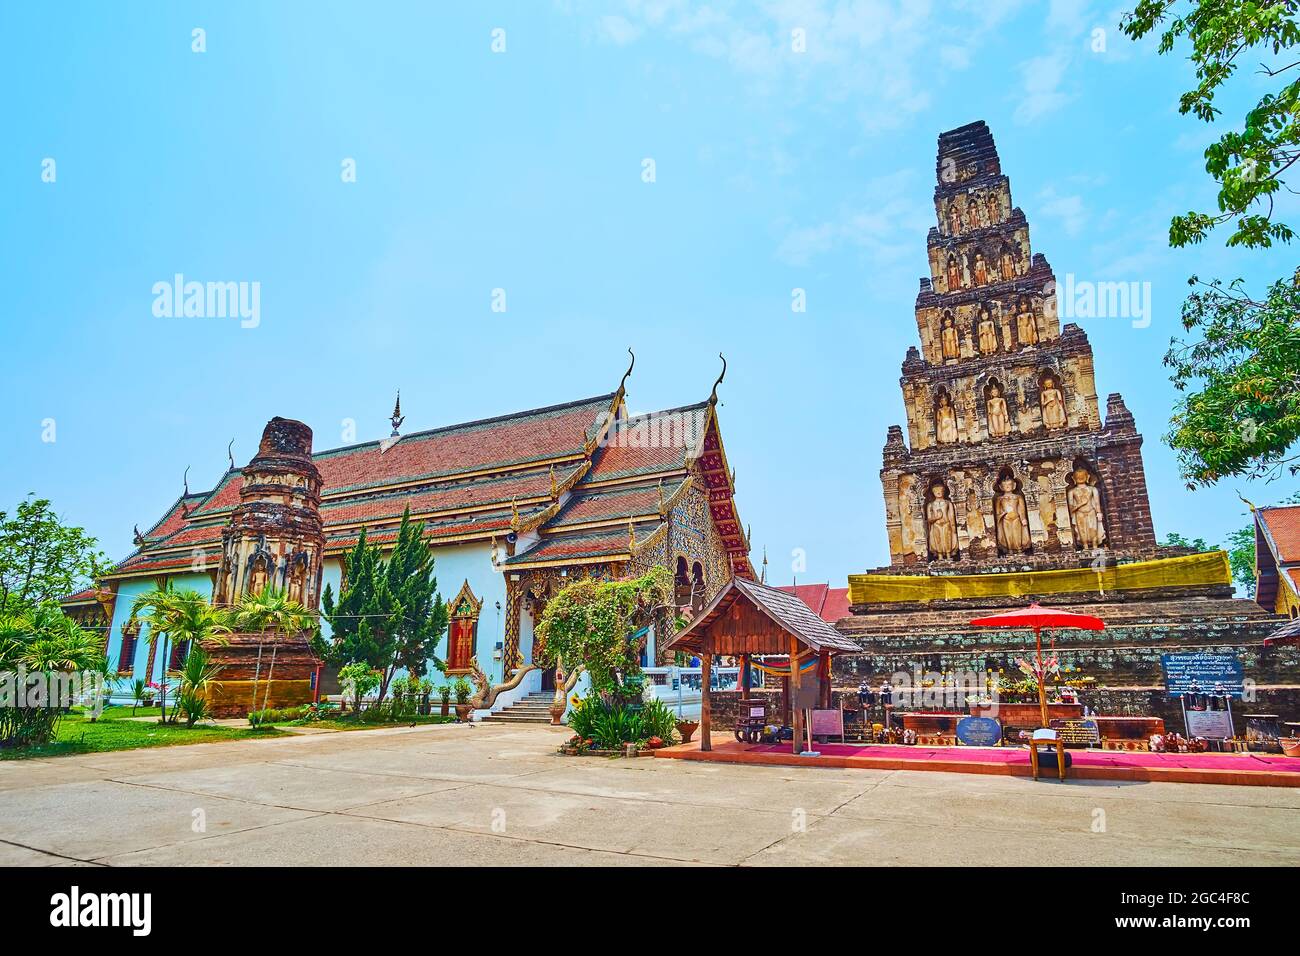 The splendid ancient Wat Chammathewi Temple with ruins of Ratana Chedi (stupa from the left) and Suwan Chedi Chang Kot (Jungkote) with Buddhas in nich Stock Photo